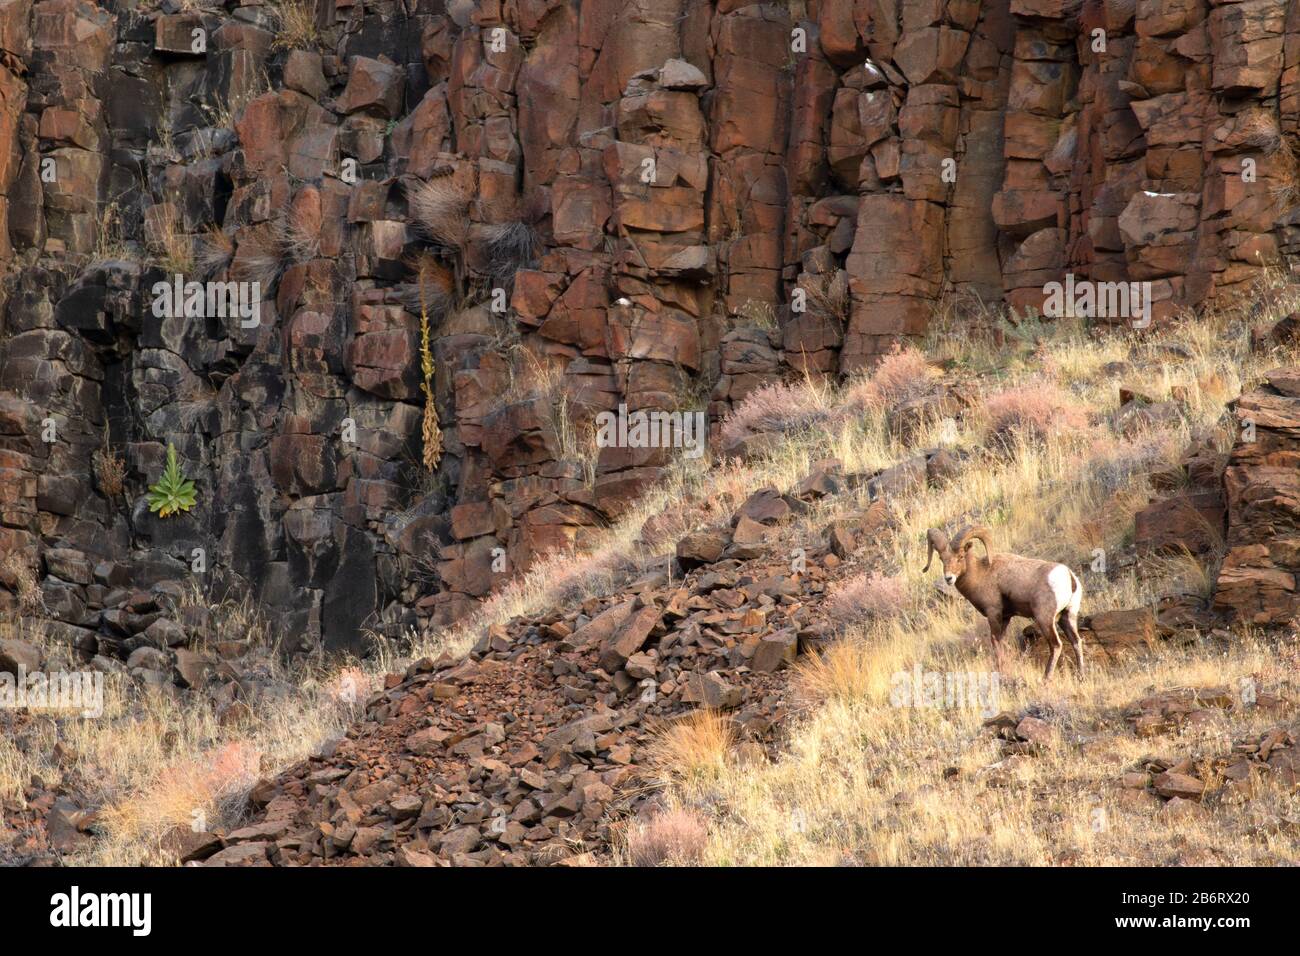 Bighorn sheep, Deschutes Wild and Scenic River, Lower Deschutes National Back Country Byway, Prineville District Bureau of Land Management, Oregon Stock Photo